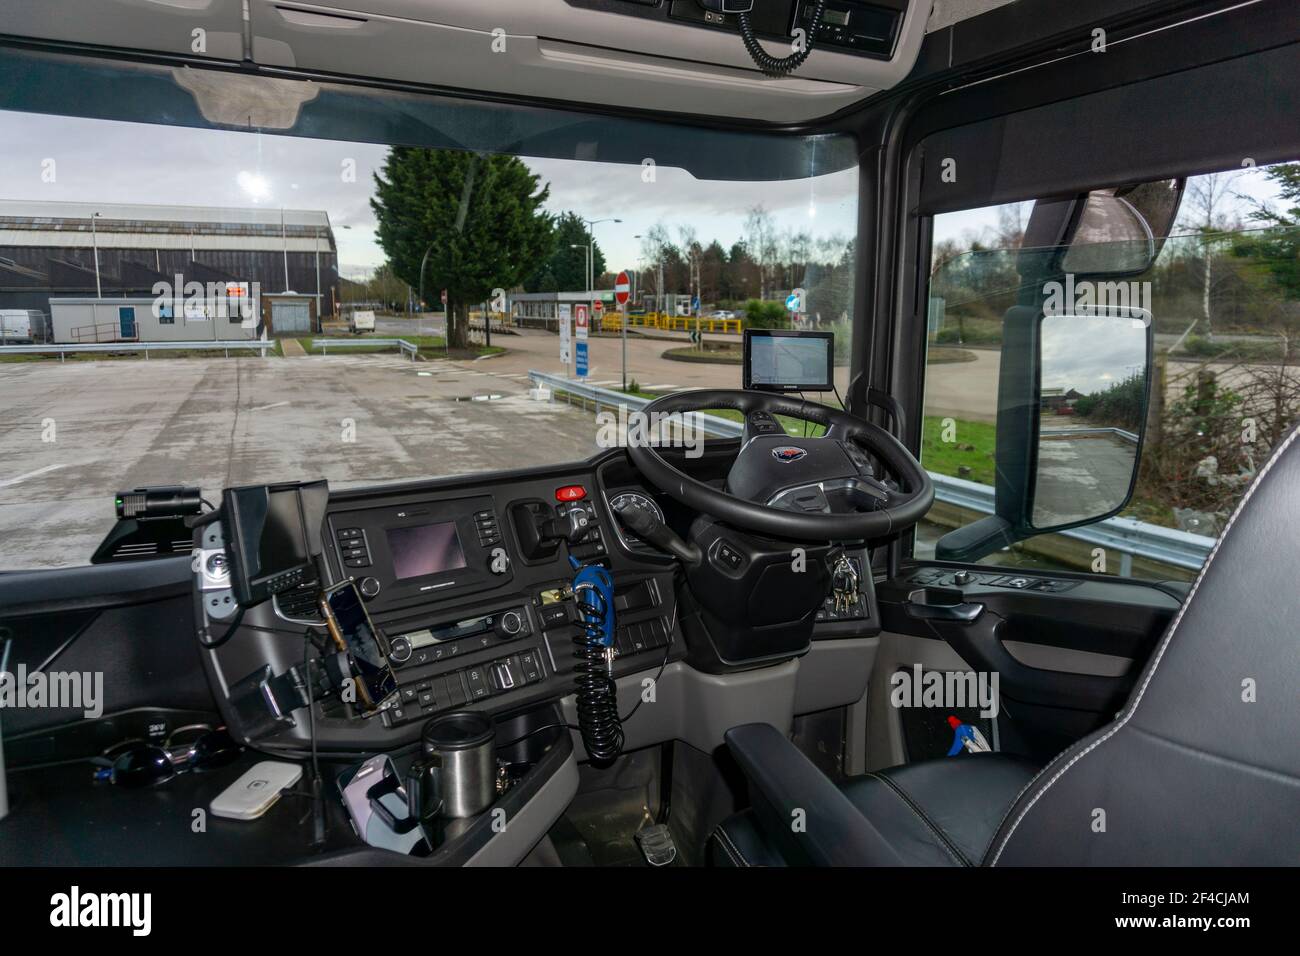 Scania V8 Semi Truck Interior View of Drivers Cockpit showing the controls  and Navigation Equipment and Camera Screens Stock Photo - Alamy